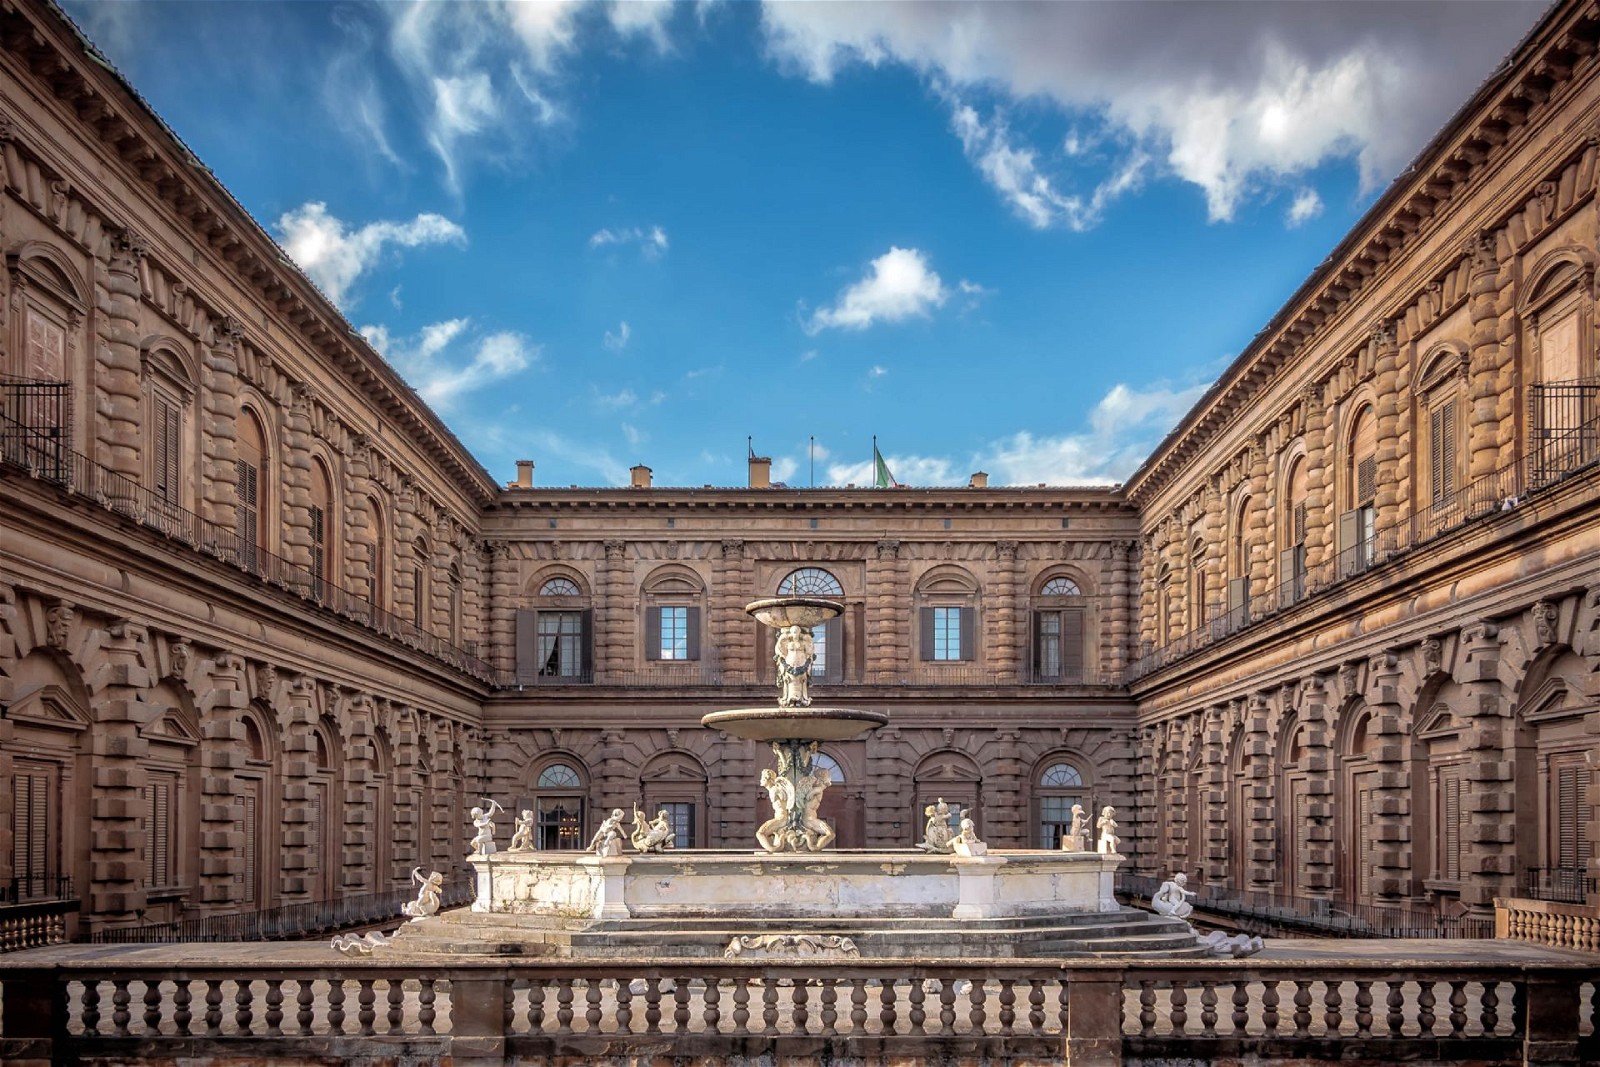 Palazzo Pitti is a museum located in Oltrarno, a beautiful neighborhood of Florence. The building, which belonged to the Pitti family, houses the rich collections of the Medici family